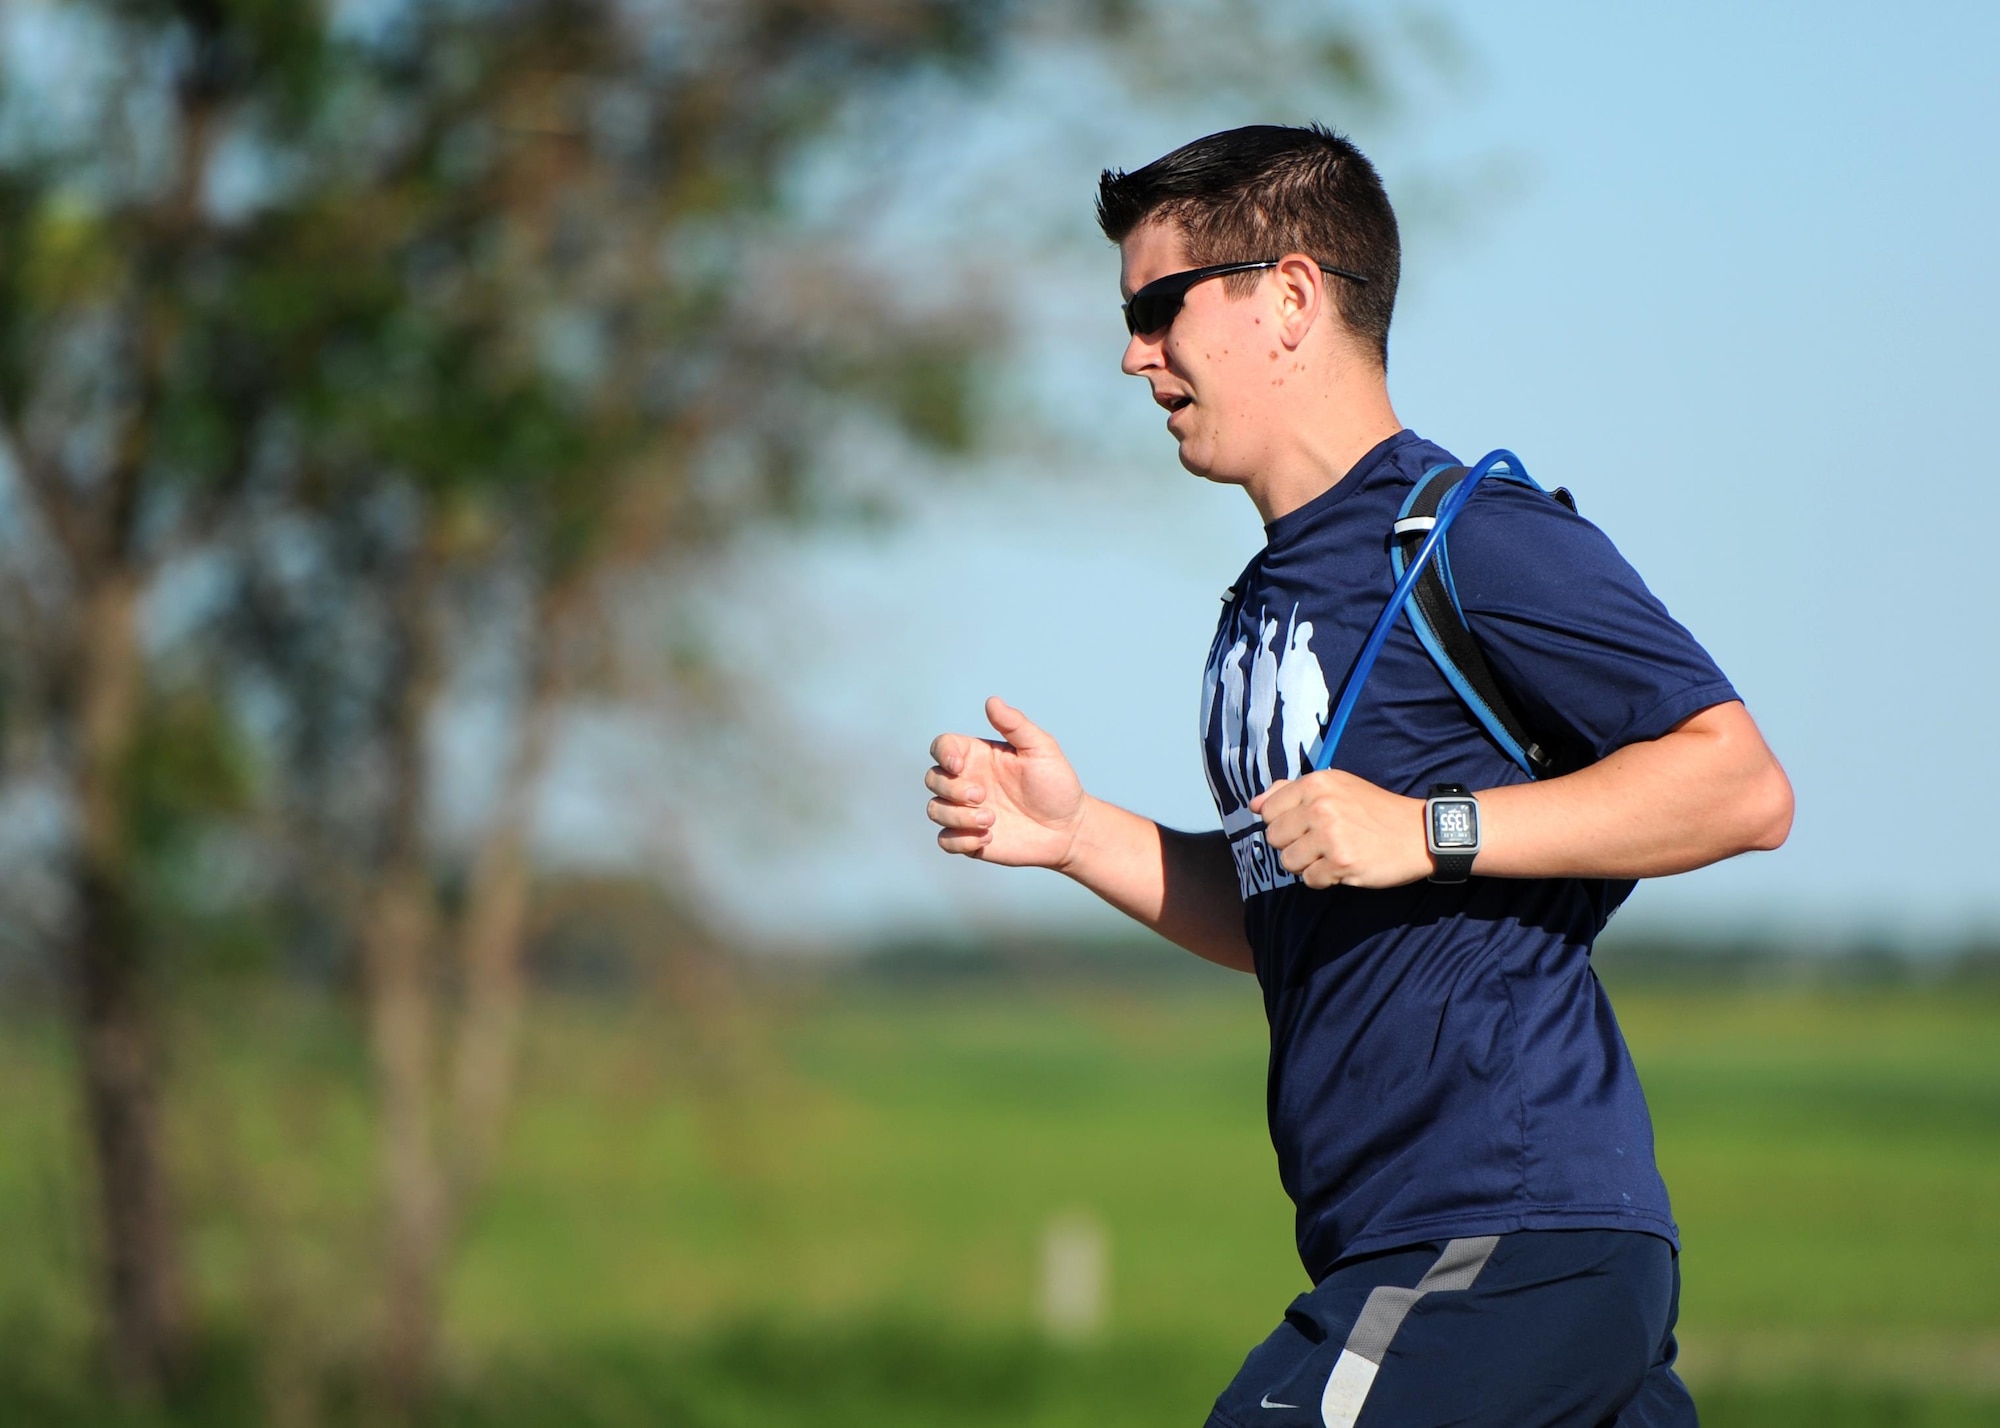 Staff Sgt. Brendan Brustad, 319th Air Base Wing assistant to the wing executive officer, grips his portable hydration device during a run June 29, 2016, in Grand Forks, N.D. Brustad ran at least 22 miles a day for the entire month of June to raise awareness for post-traumatic stress disorder. (U.S. Air Force photo by Senior Airman Ryan Sparks/Released)